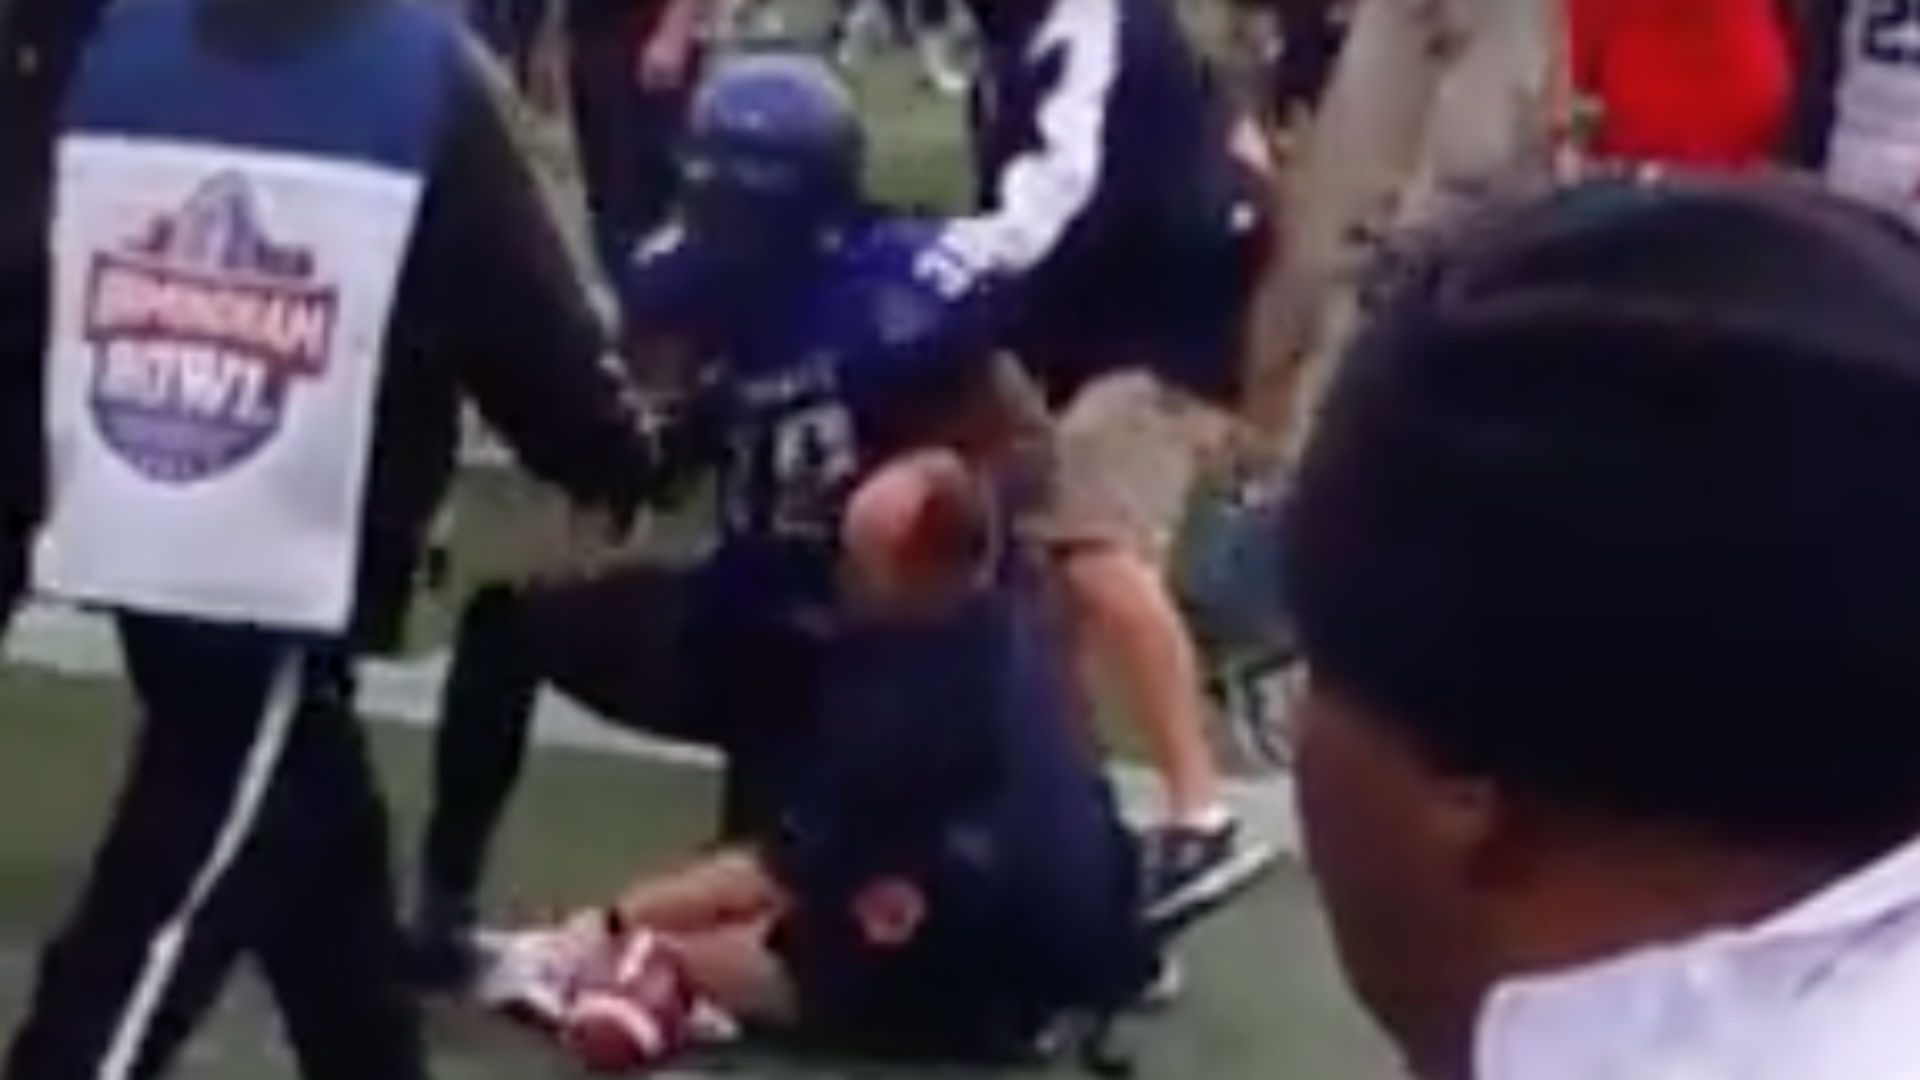 Memphis player dismissed after stealing Auburn game ball